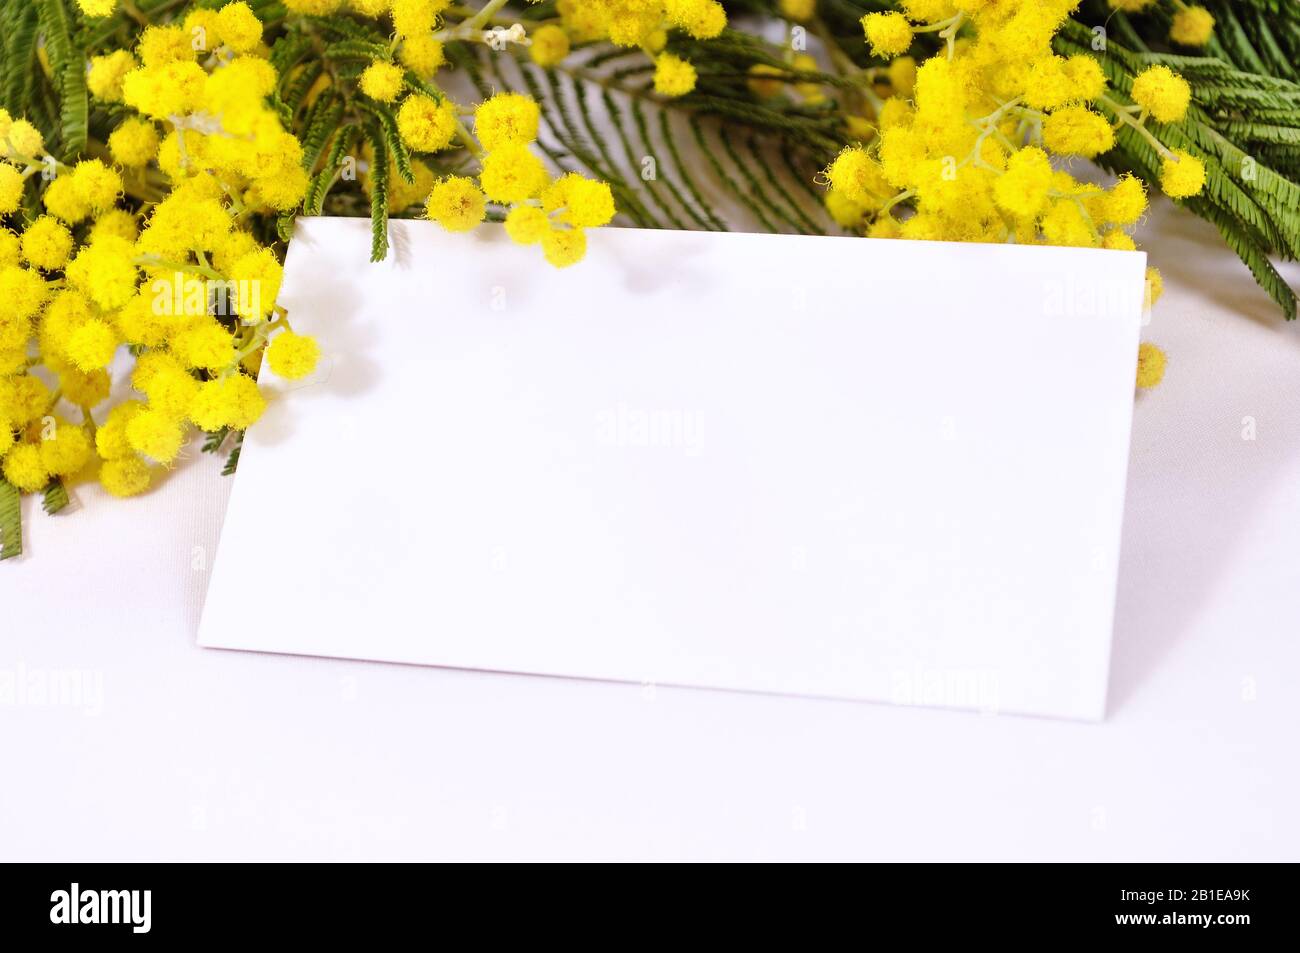 Spring Background White Card With Free Space For Text In The Mimosa Flowers Stock Photo Alamy